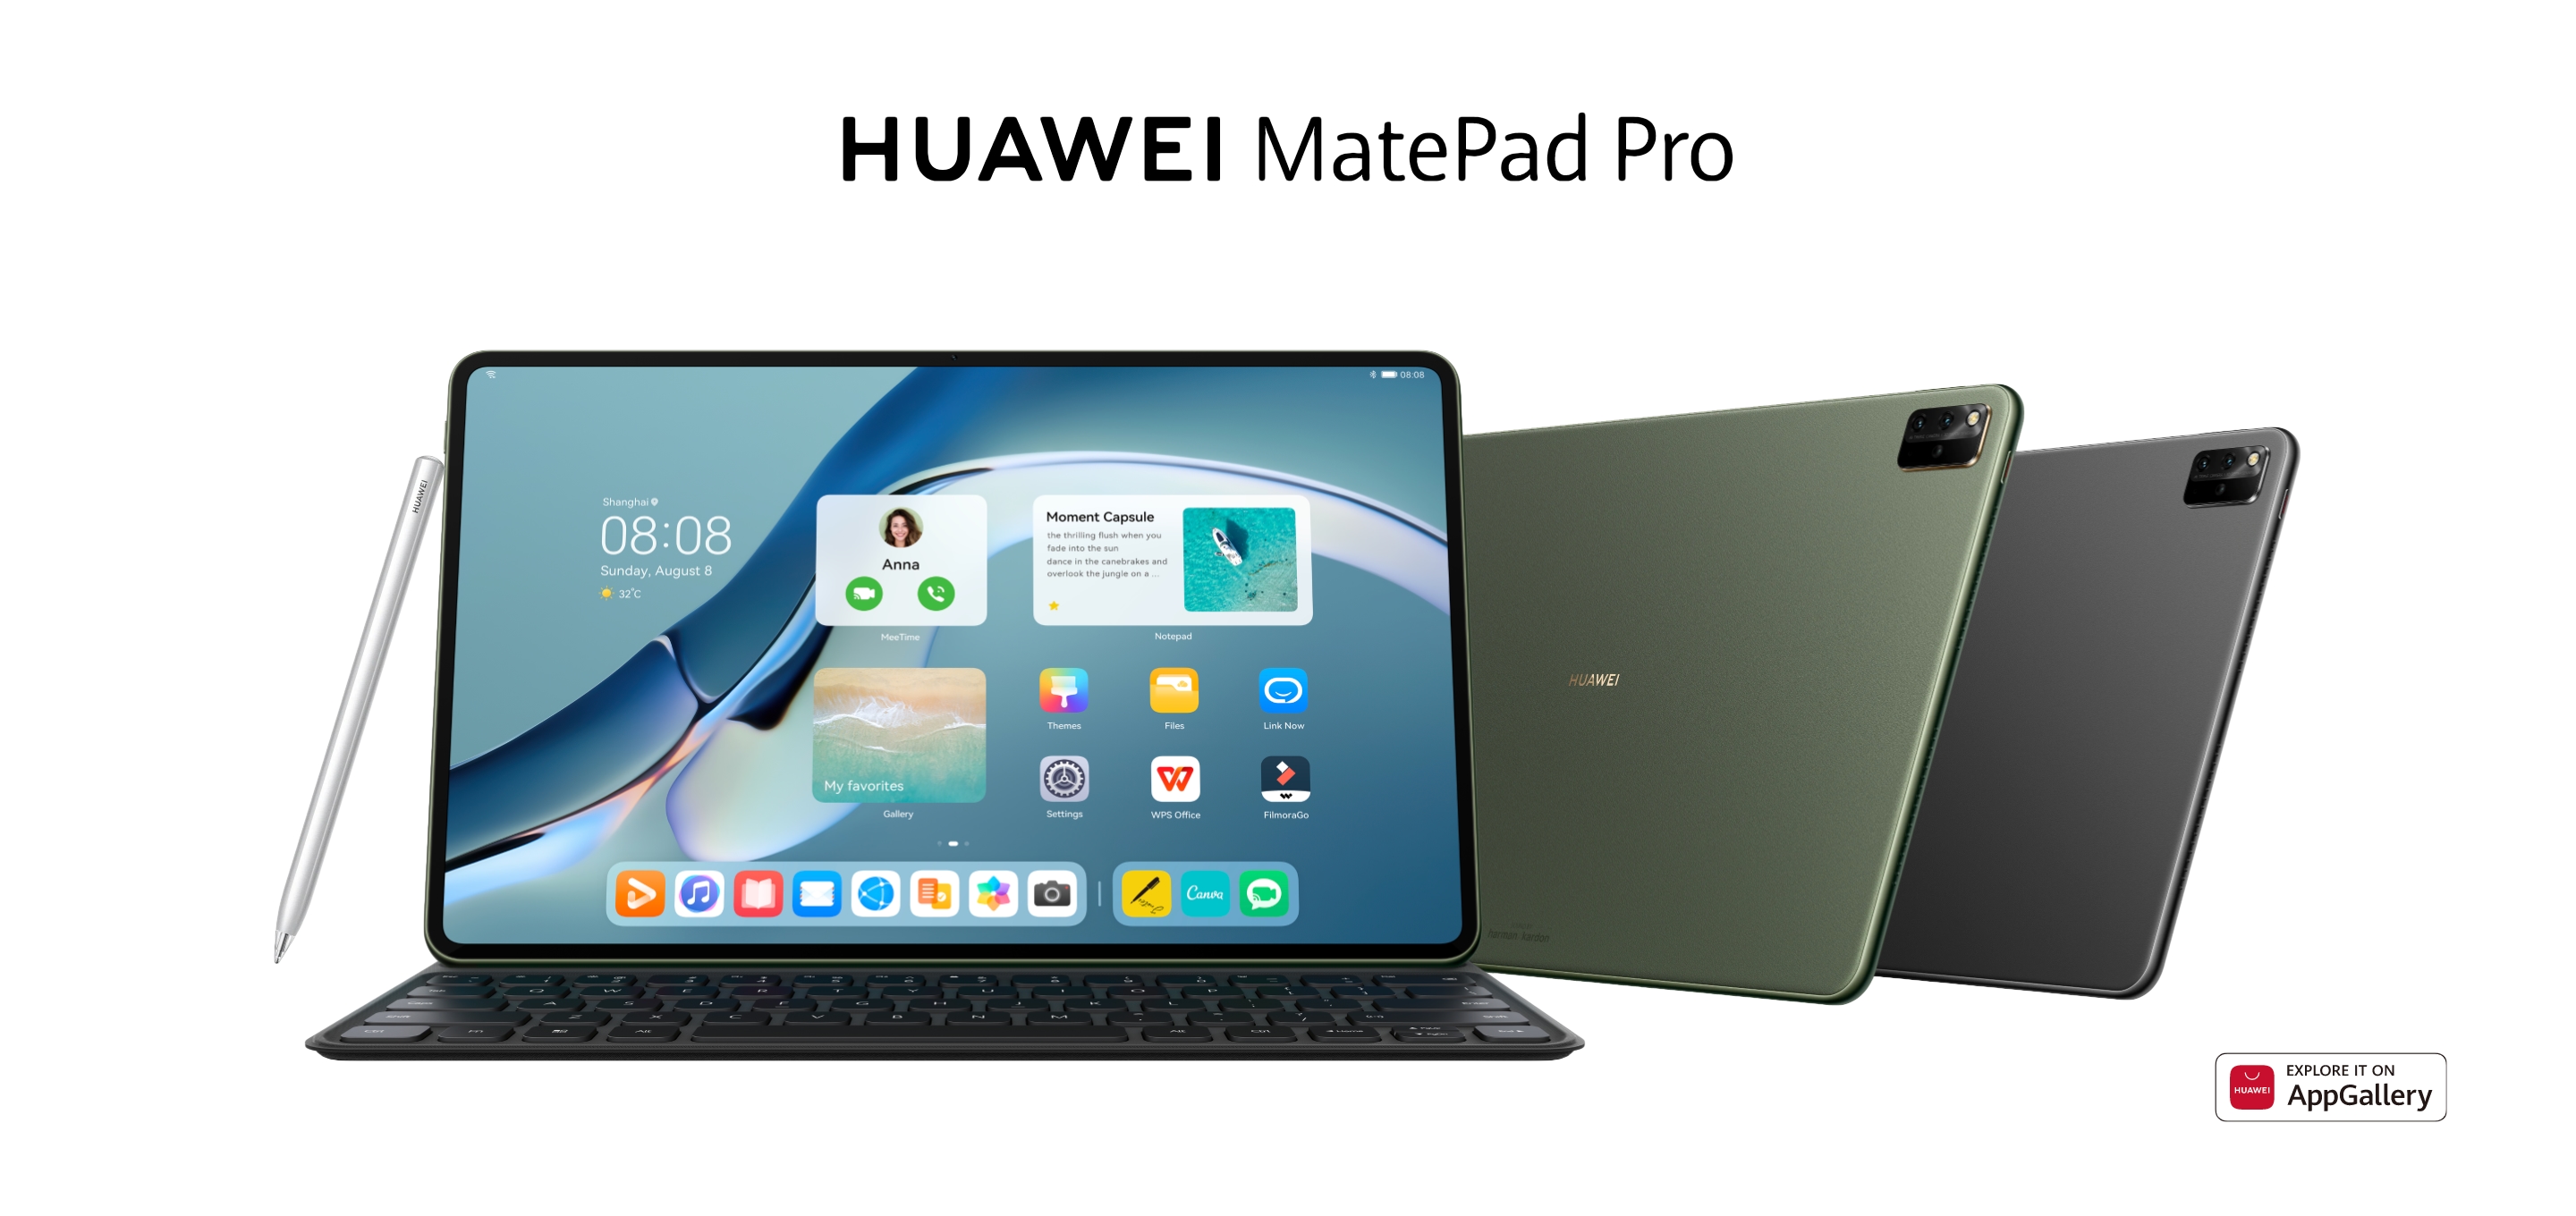 Huawei will release a new version of the MatePad Pro 12.6 tablet with a 120Hz screen and a Kirin 9000 5G chip